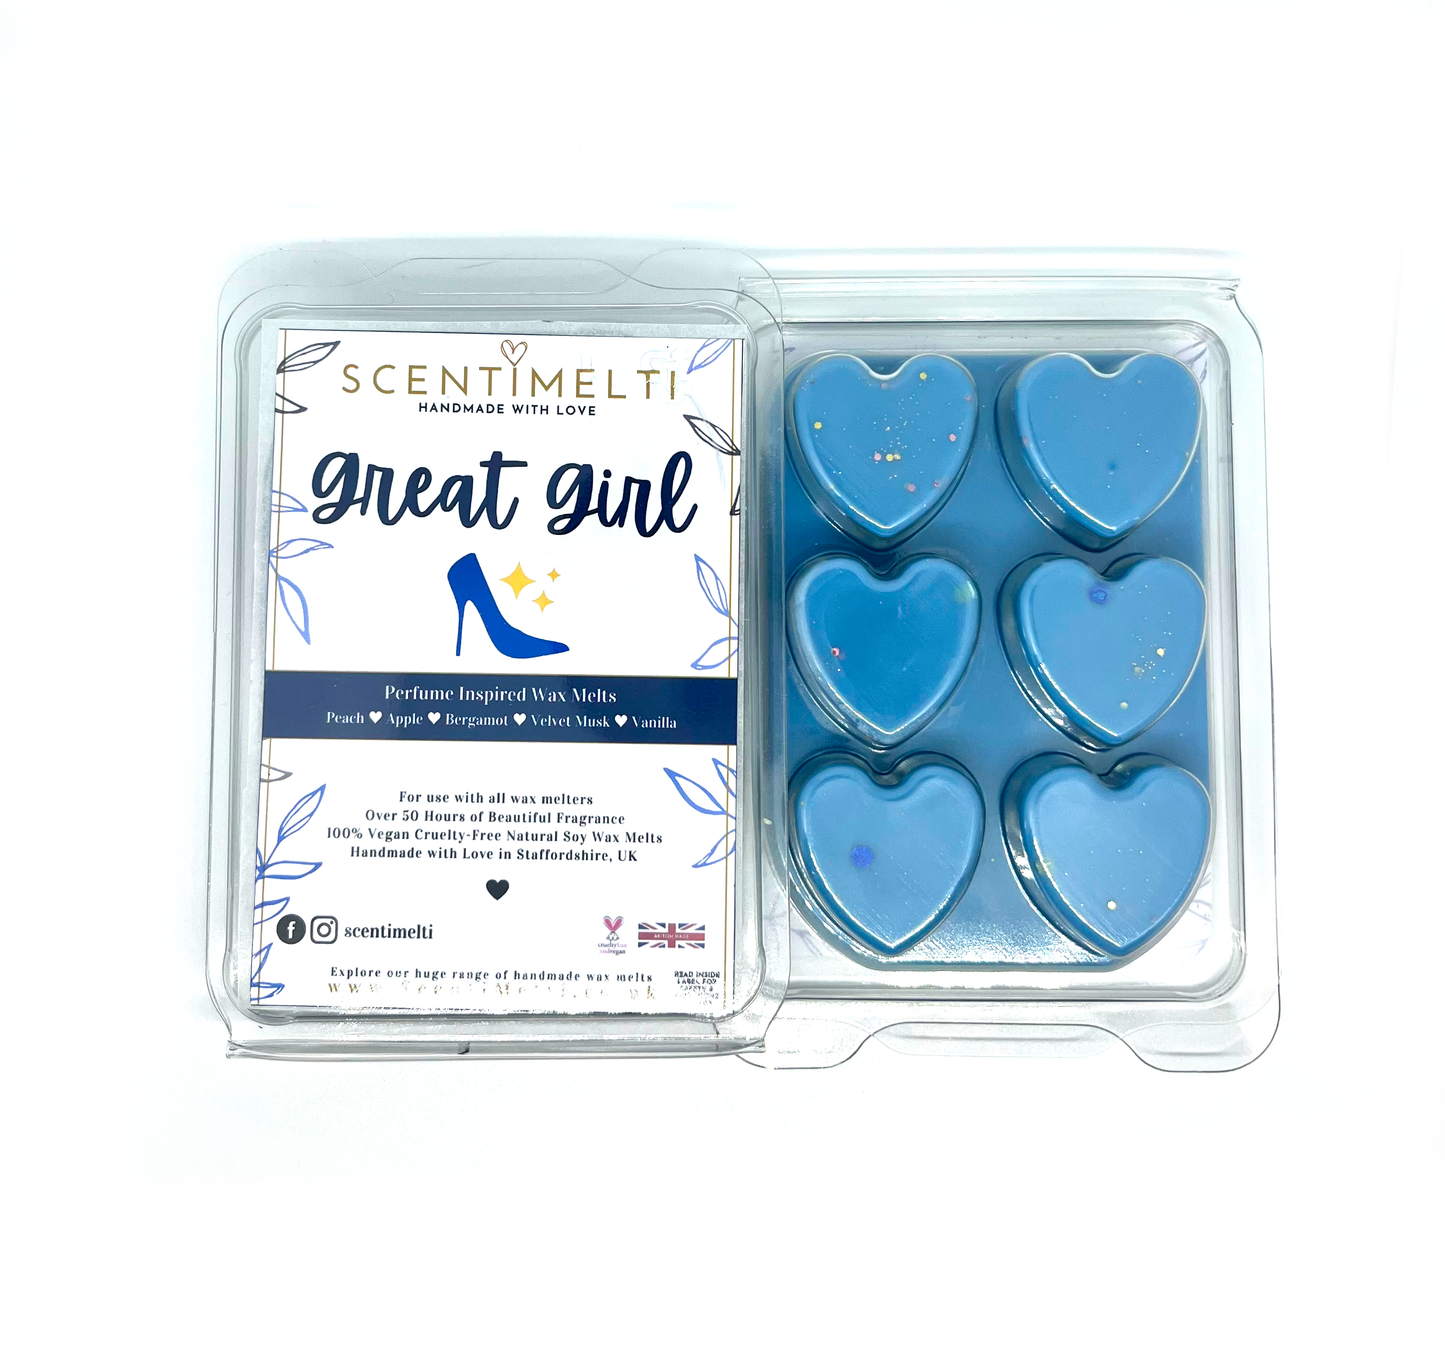 Great Girl Wax Melts Perfume Inspired by CH - ScentiMelti  Great Girl Wax Melts Perfume Inspired by CH